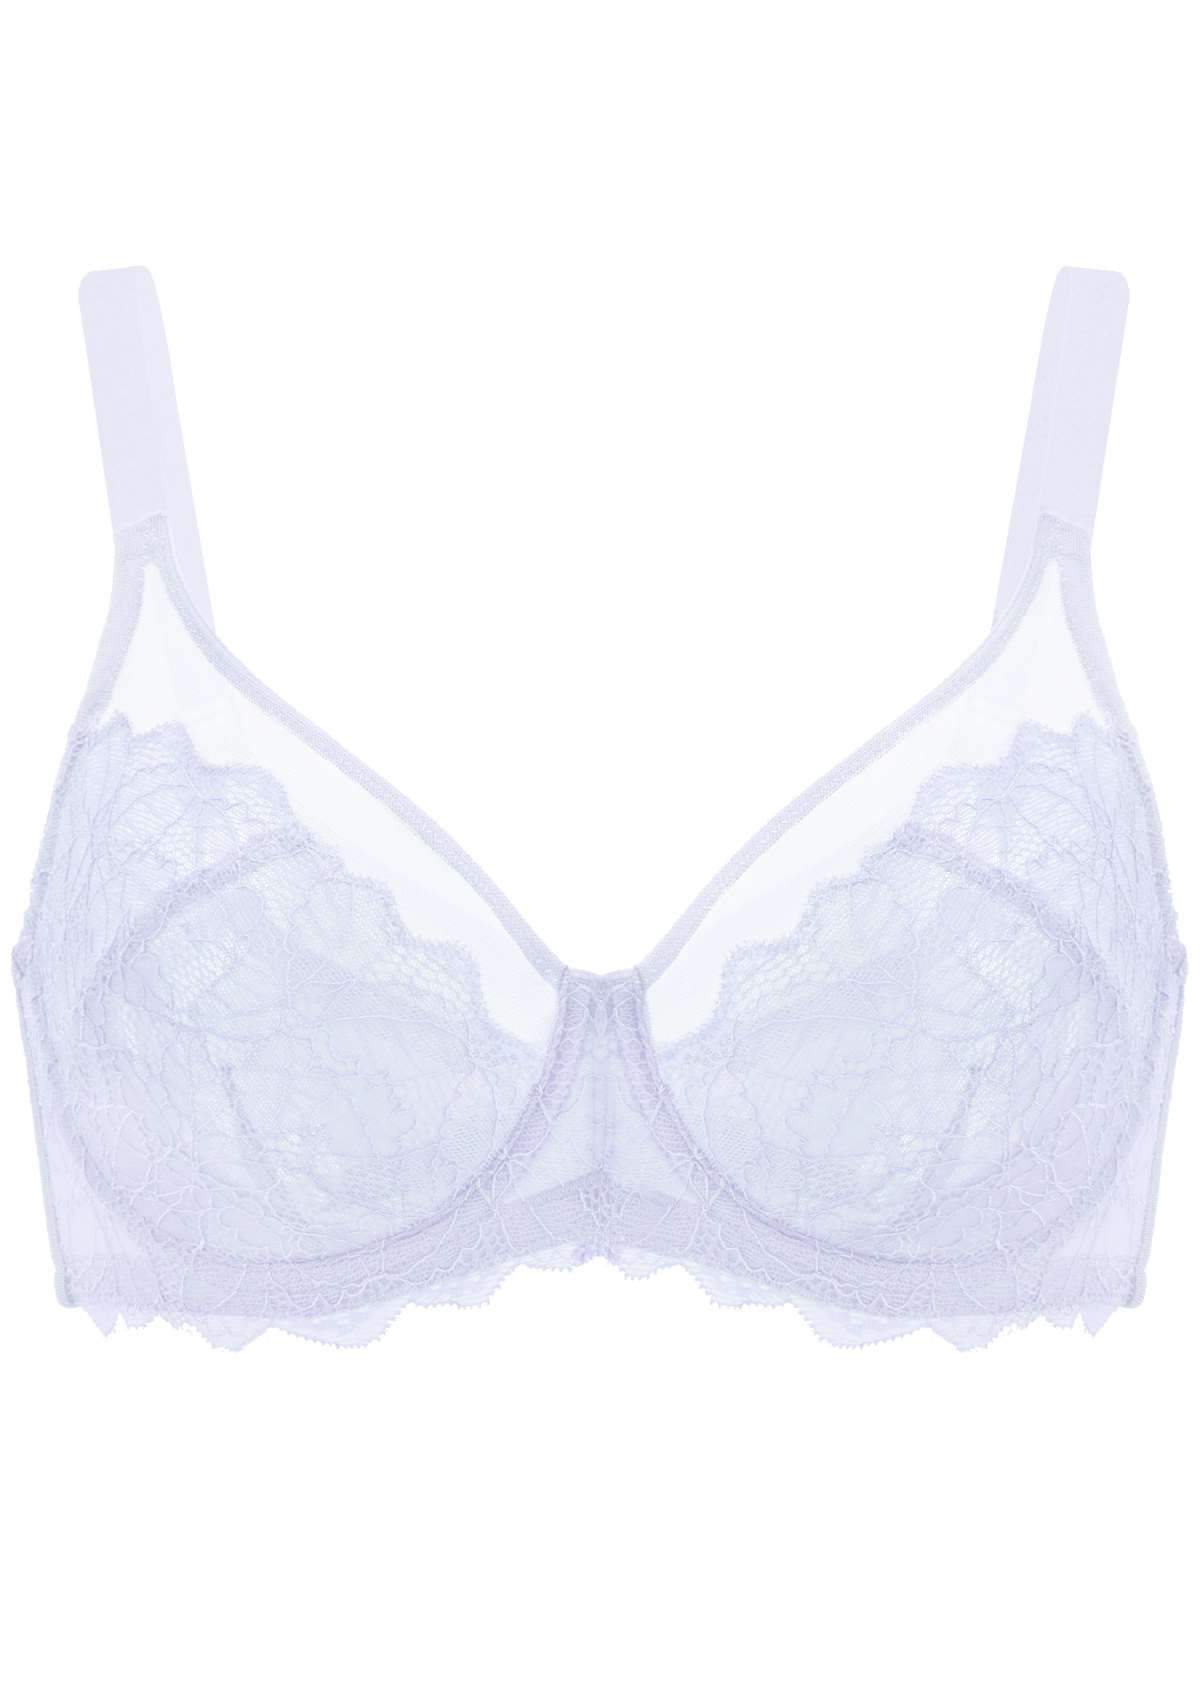 HSIA Wisteria Bra For Lift And Support - Full Coverage Minimizer Bra - Light Pink / 40 / D